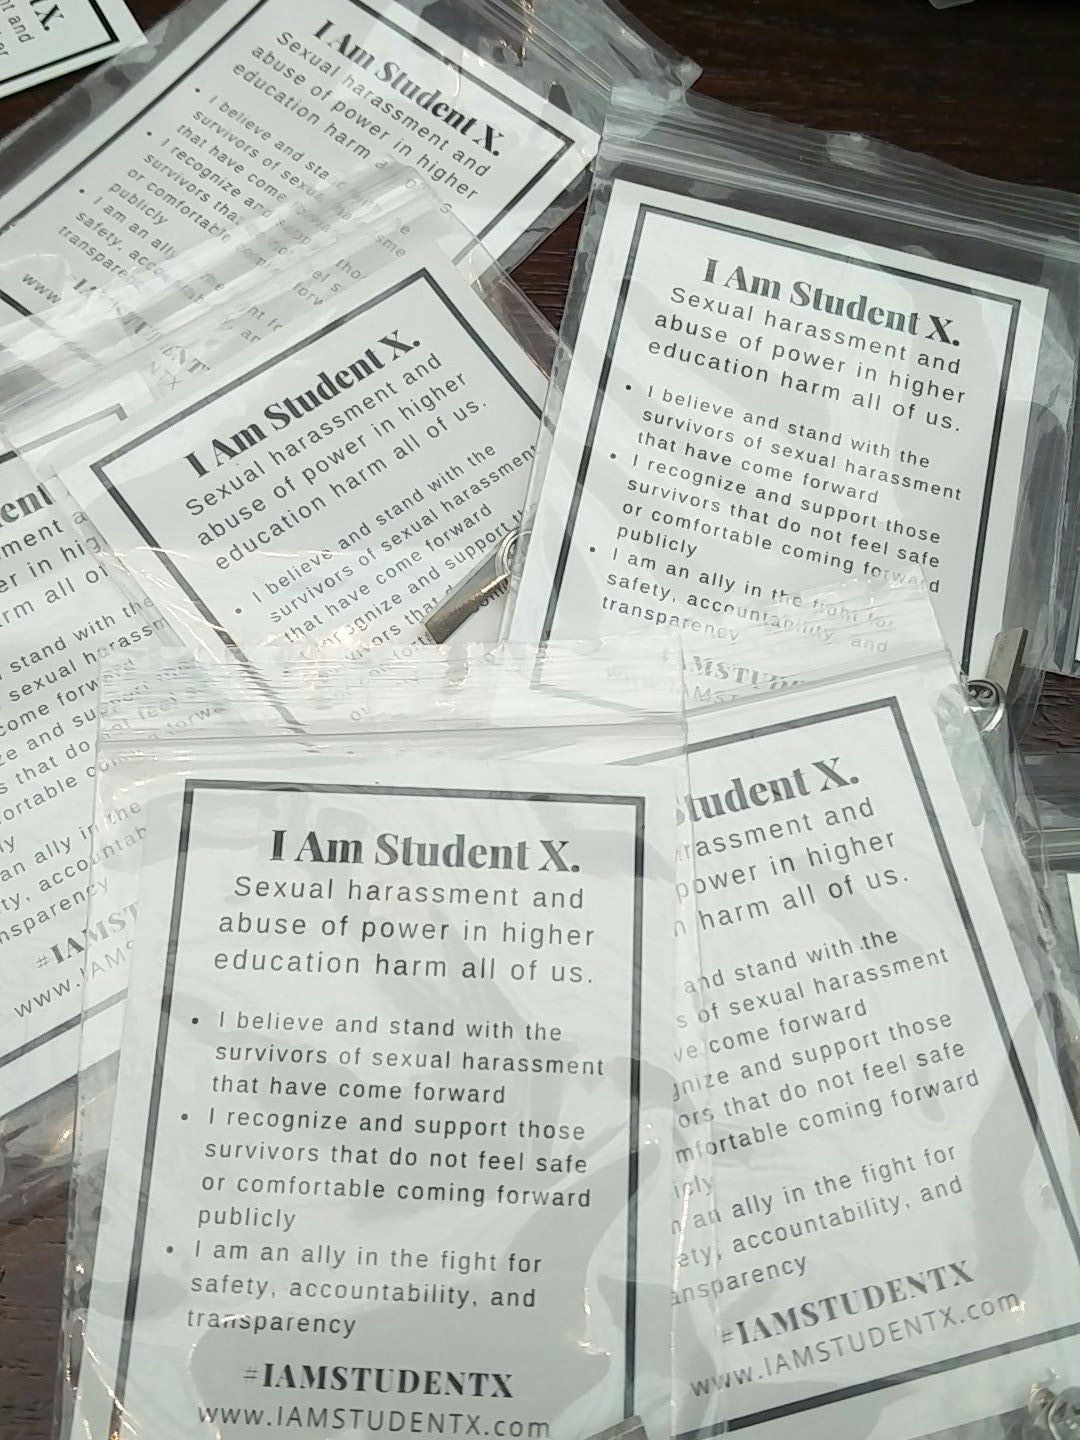 Flyers handed out by the “I Am Student X” campaign at the Society for Social Work and Research conference